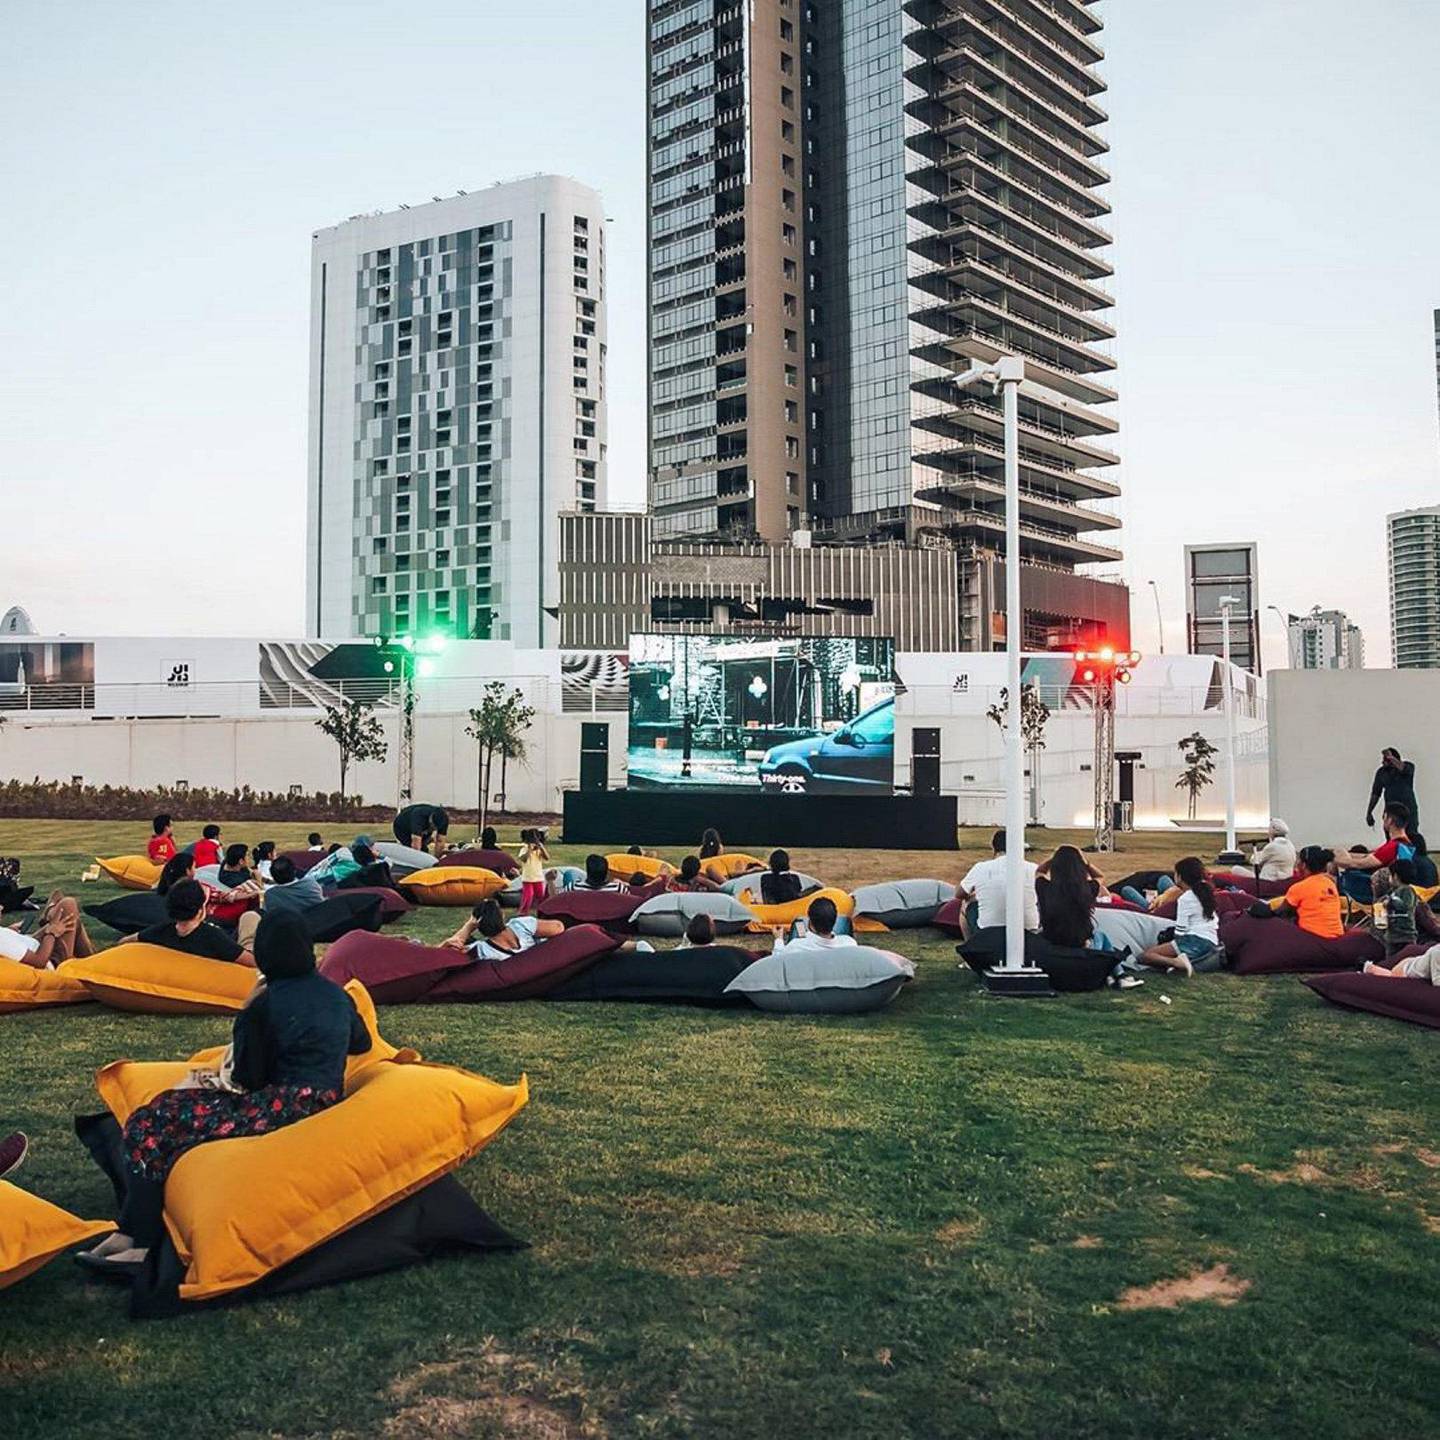 The new park on Reem Island features an open-air cinema, as well as a skatepark, food trucks, a stage for live performances and a DJ spinning the beats. Courtesy Reem Central Park